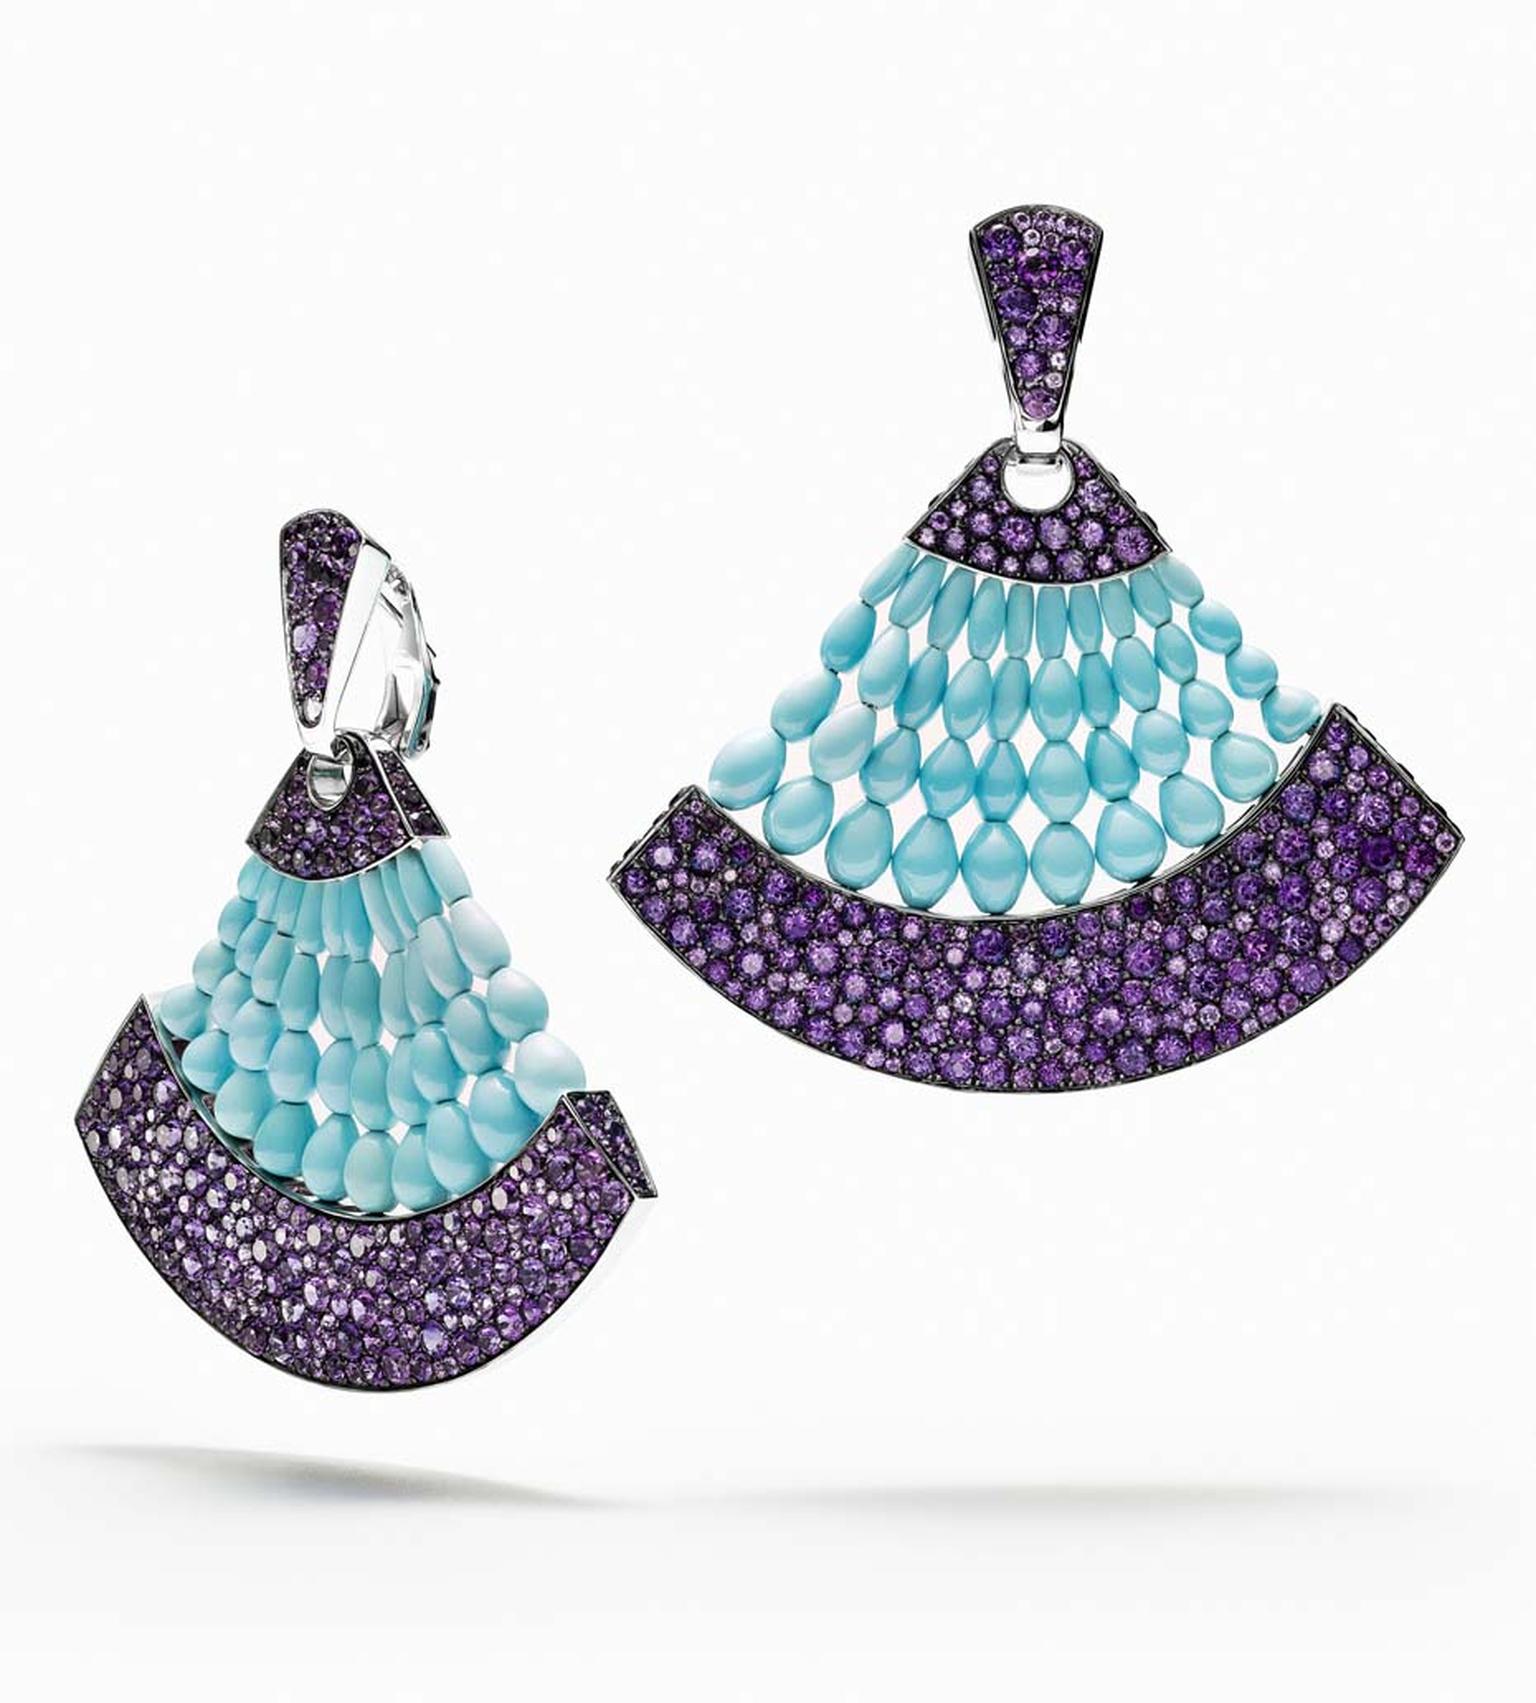 de GRISOGONO Melody of Colours earrings in white gold, with turquoise and amethysts.